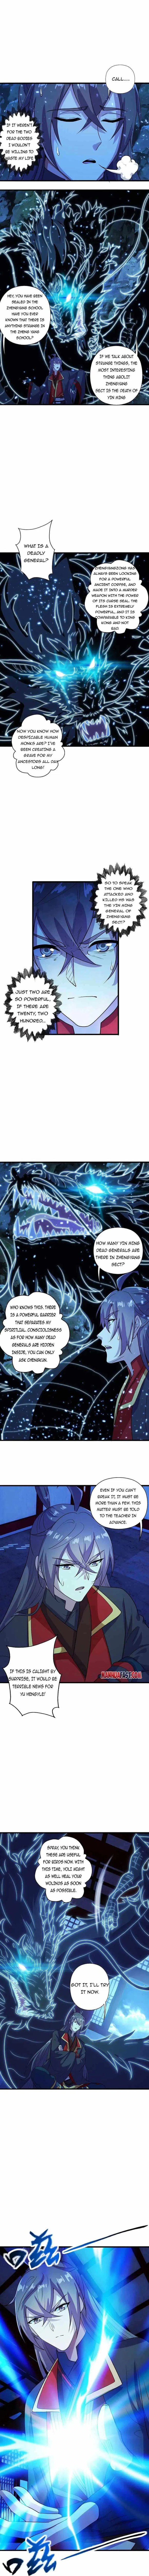 Banished Disciple's Counterattack Chapter 274 page 7